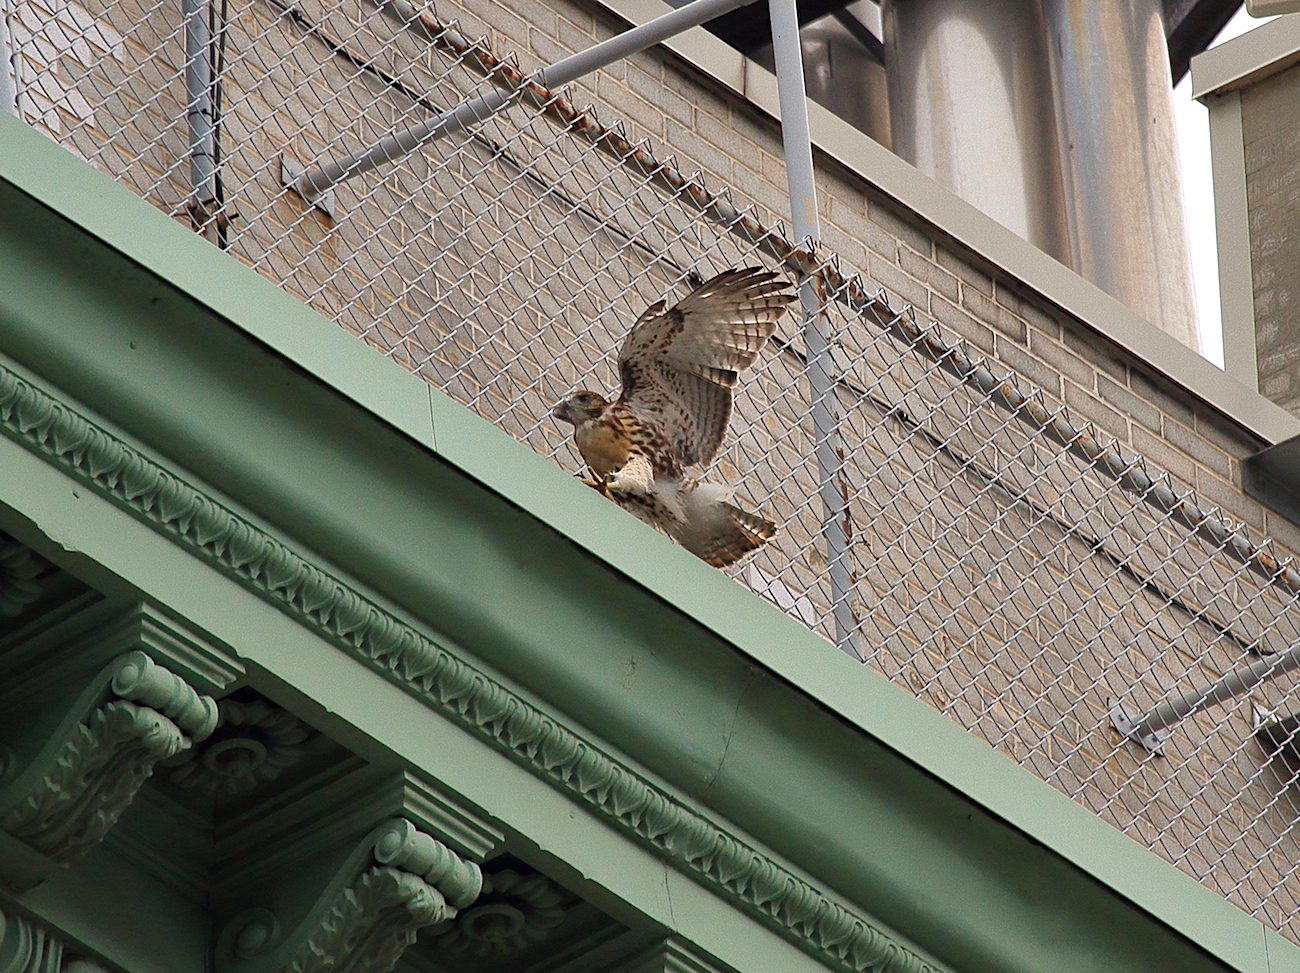 Young Red-tailed Hawk fledgling walking on NYU building roof, wings upright. Washington Square Park NYC